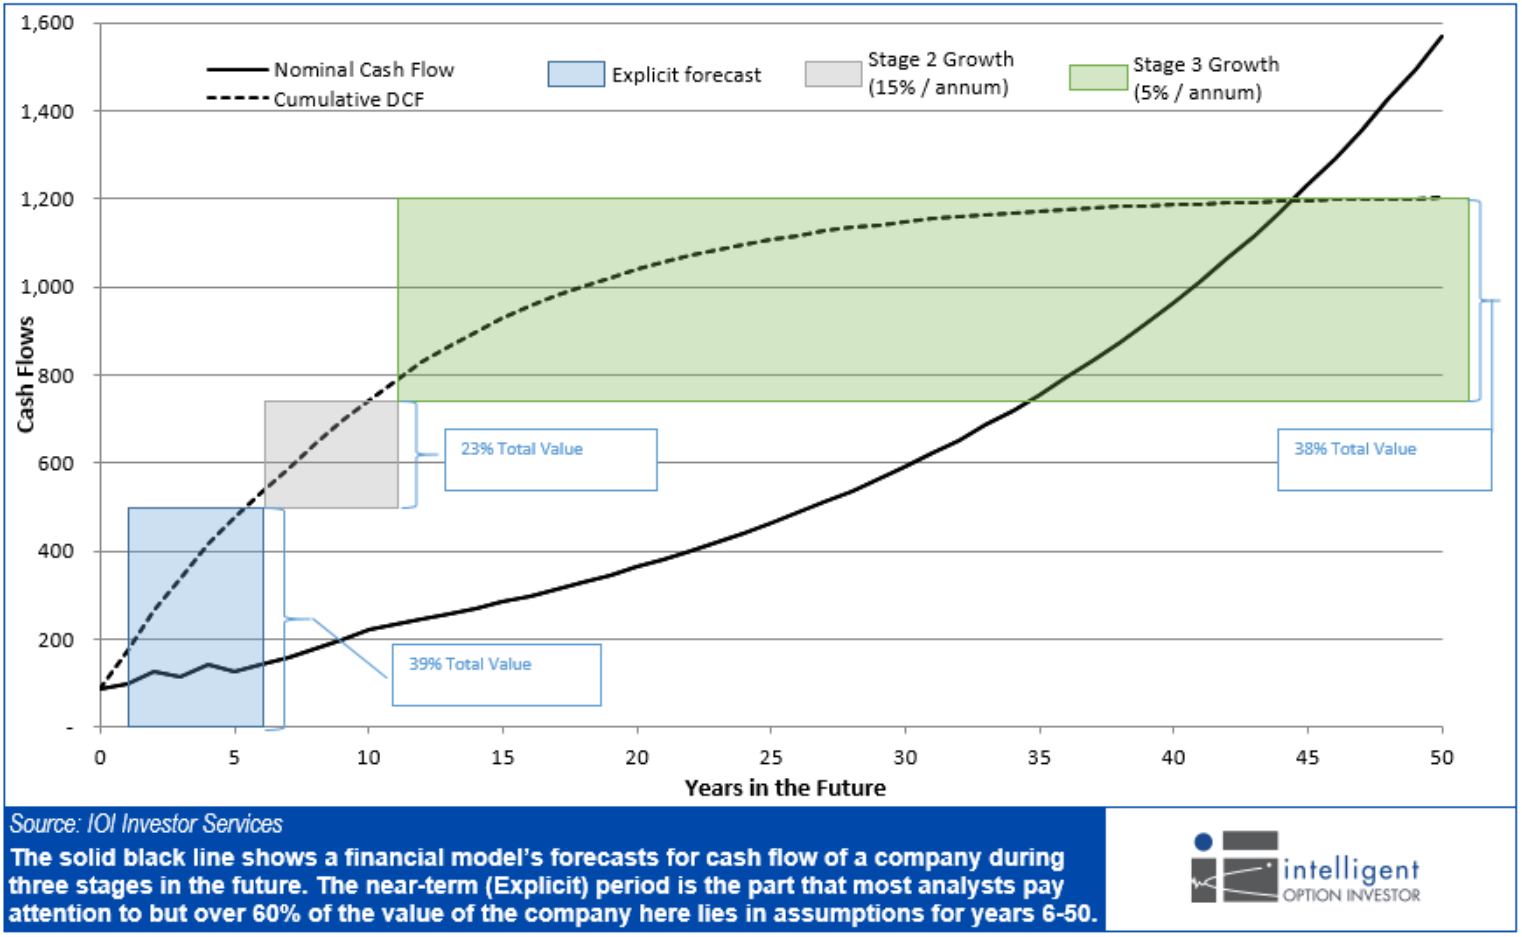 Figure 1. Dashed line represents the Discounted Cash Flows of this hypothetical firm. The range at which the DCF levels off represents the "intrinsic value" of the firm.